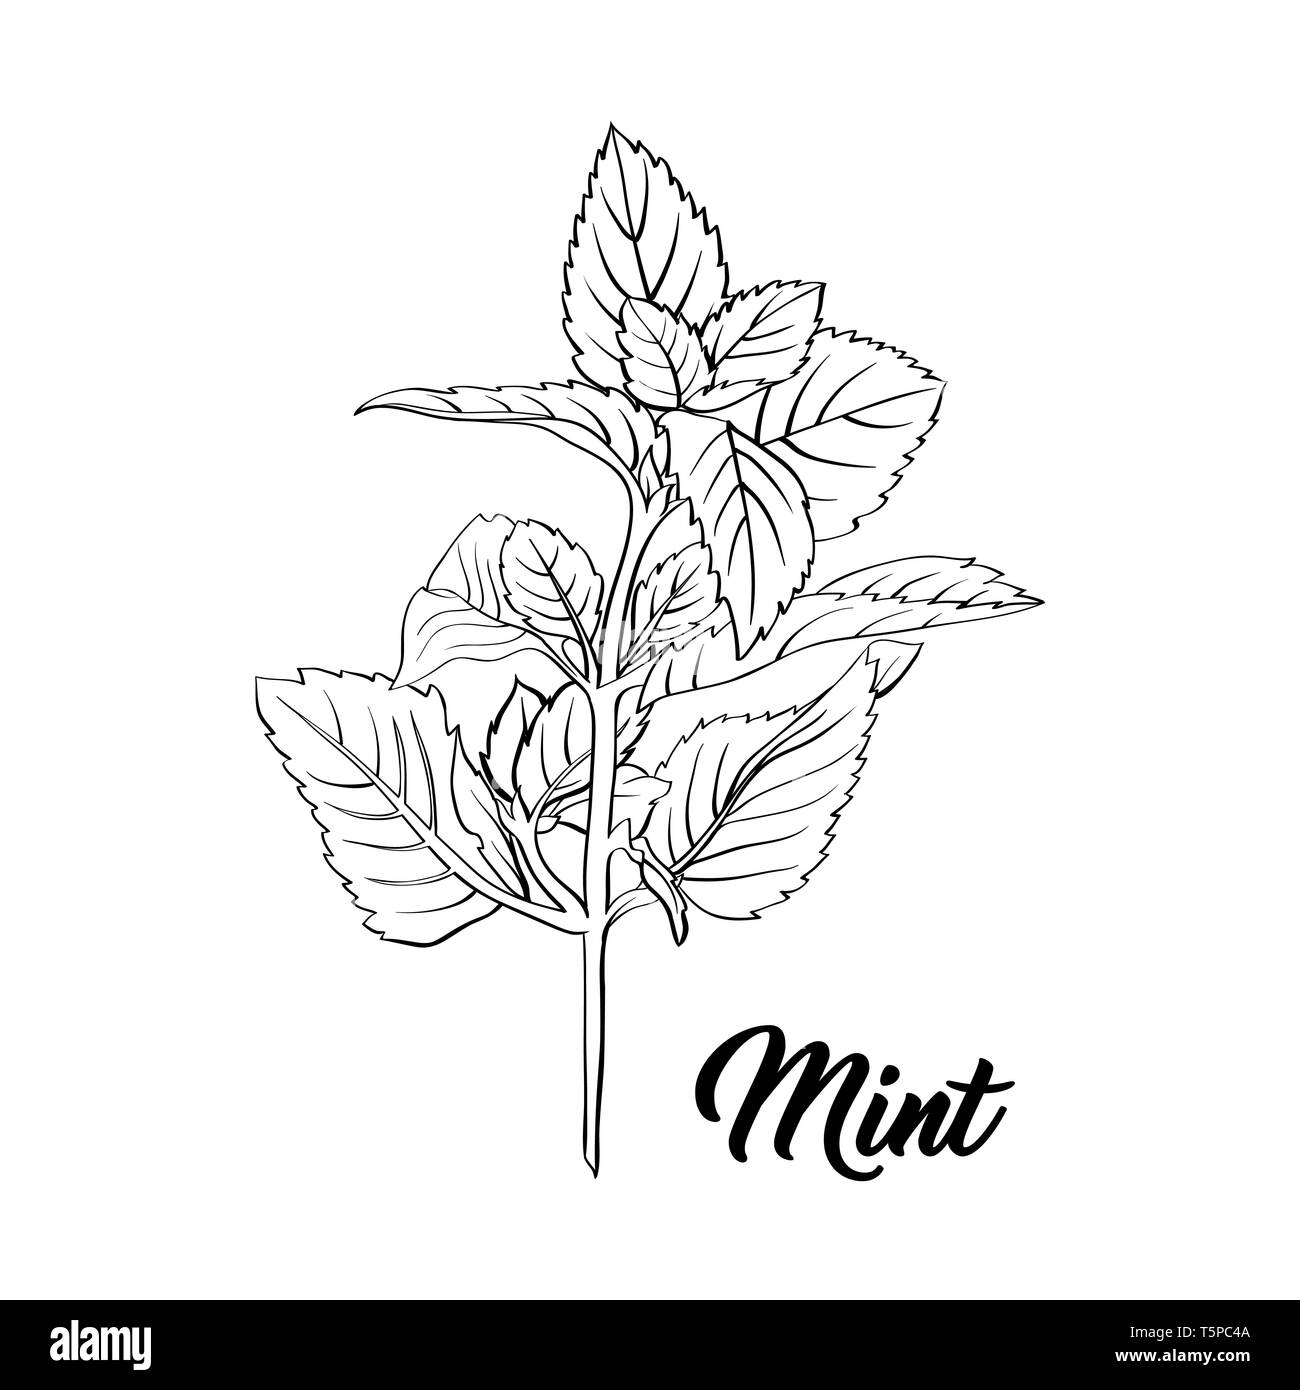 Mint Branch Monochrome Engraving. Tea Herb Sketch. Isolated Hand Drawn Sketch Drawing Peppermint Illustration or Spearmint Botany Plant. Herbal Medicine and Aromatherapy Design on the White Background Stock Vector